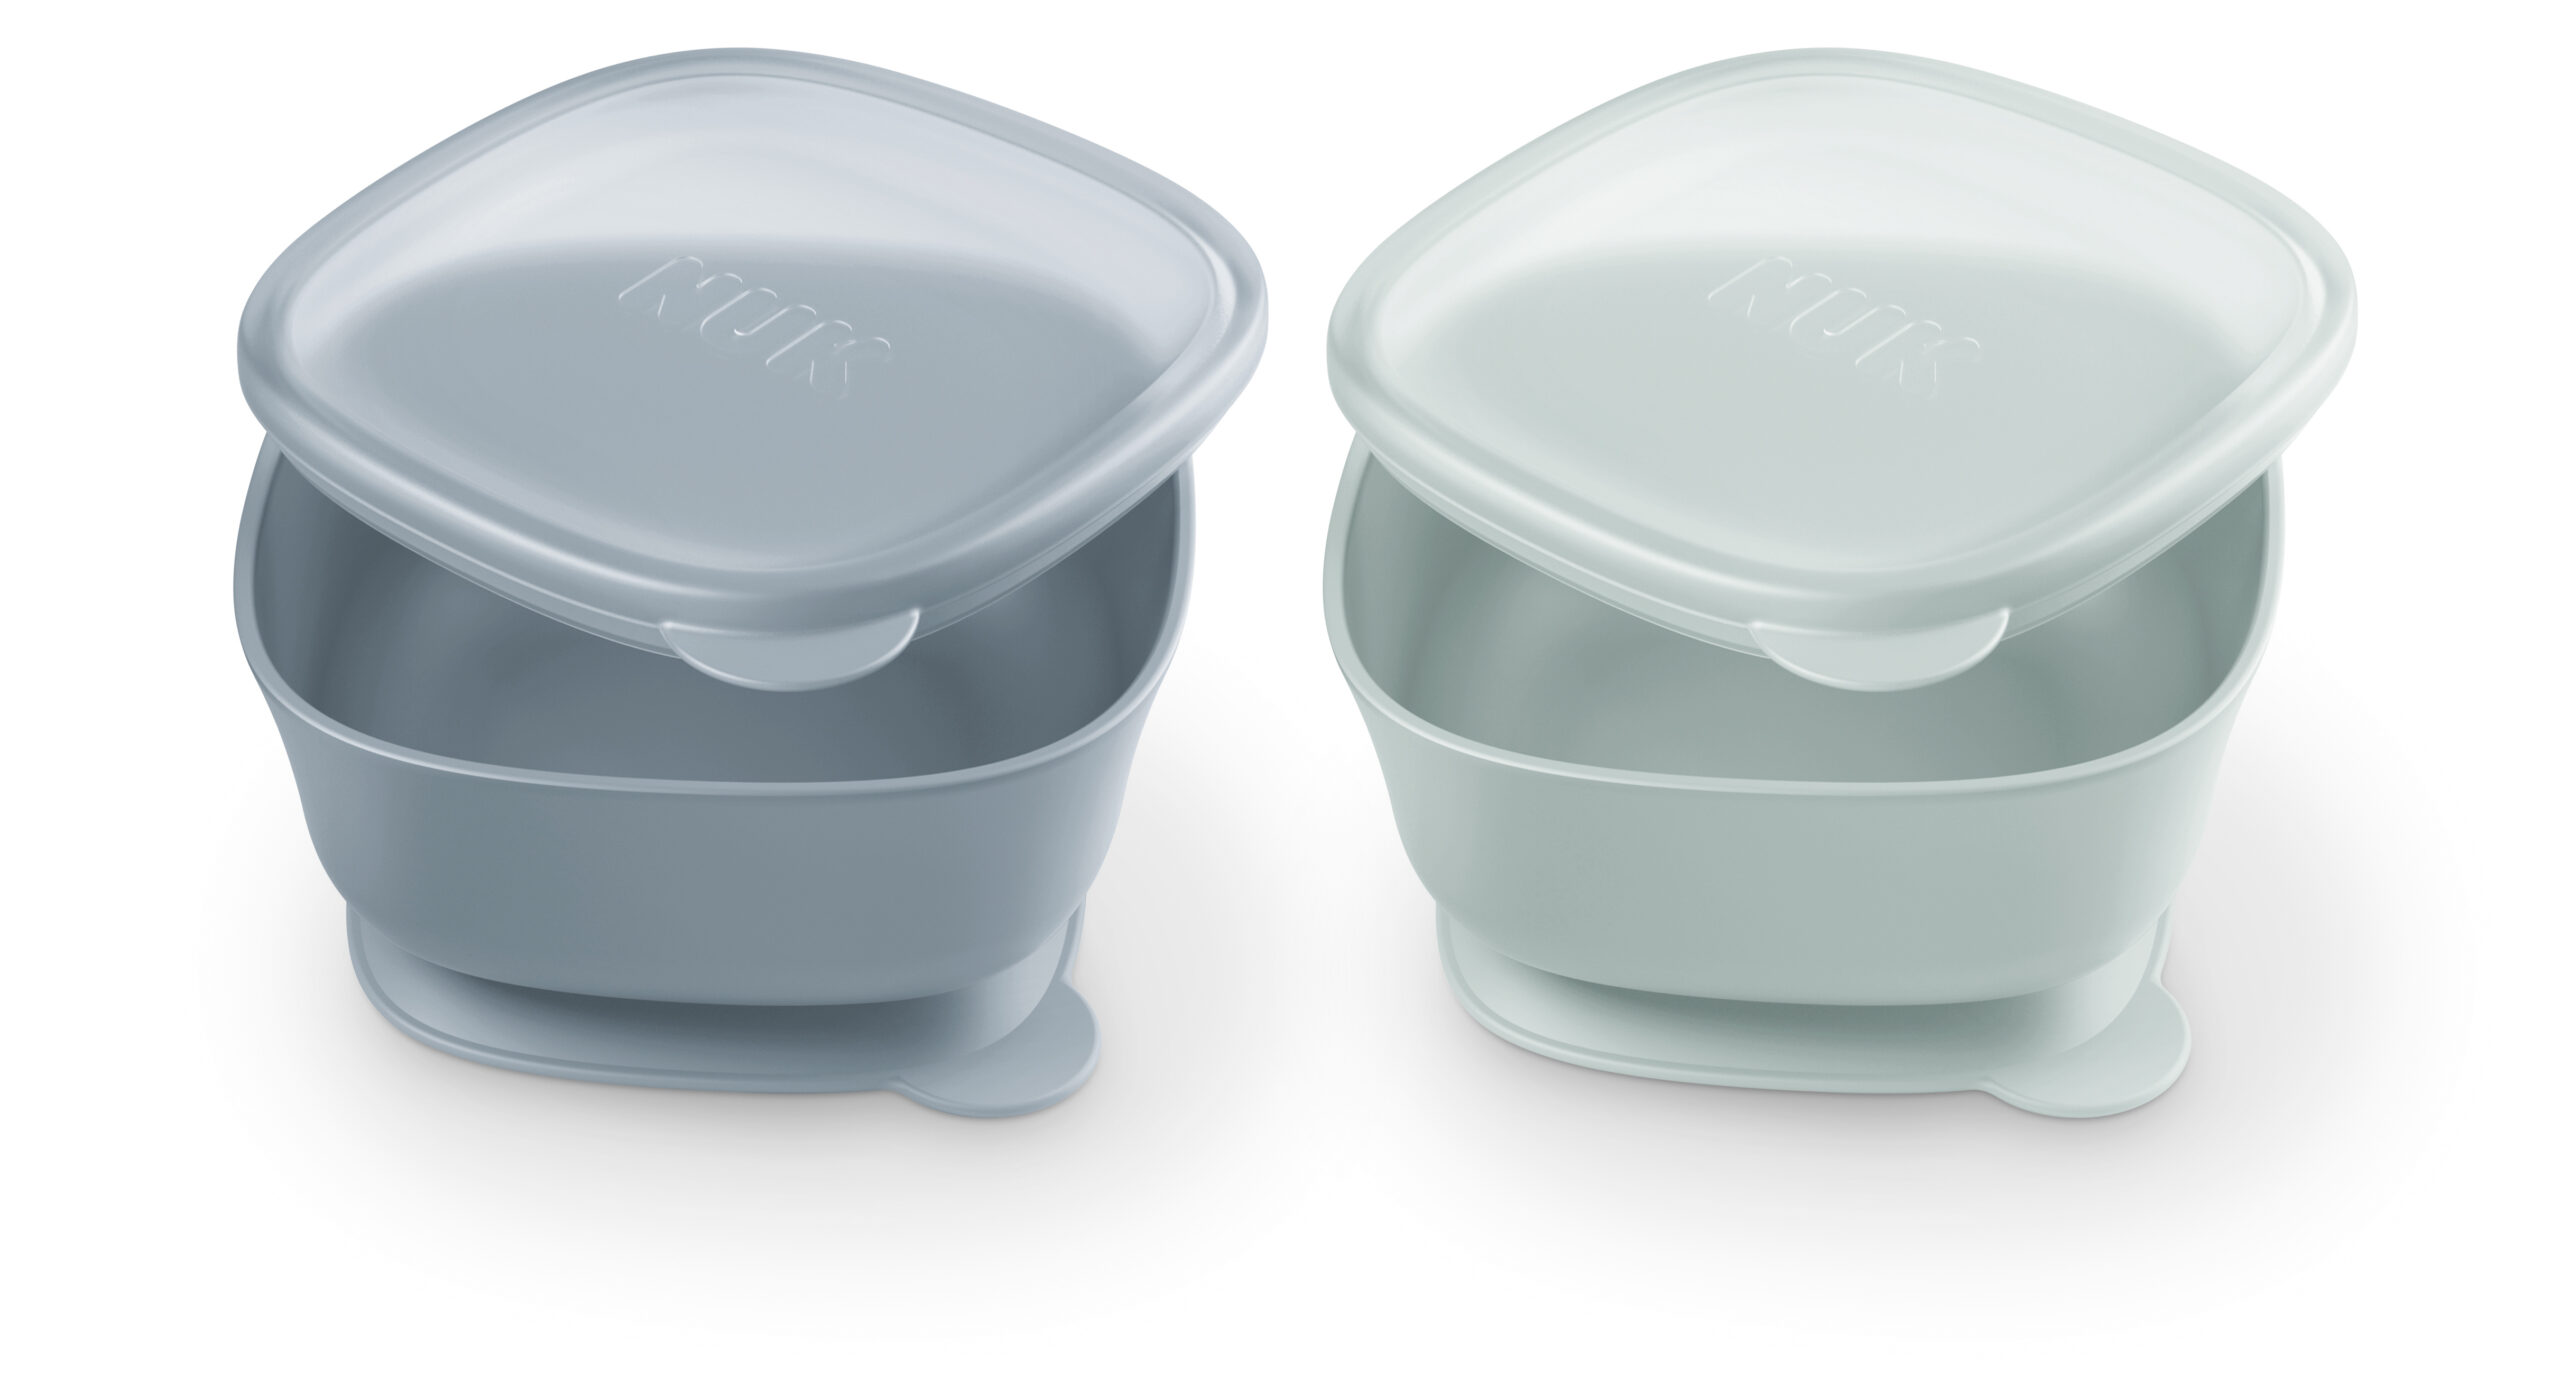 NFN Suction Bowls w/ Lid Product Image 1 of 2